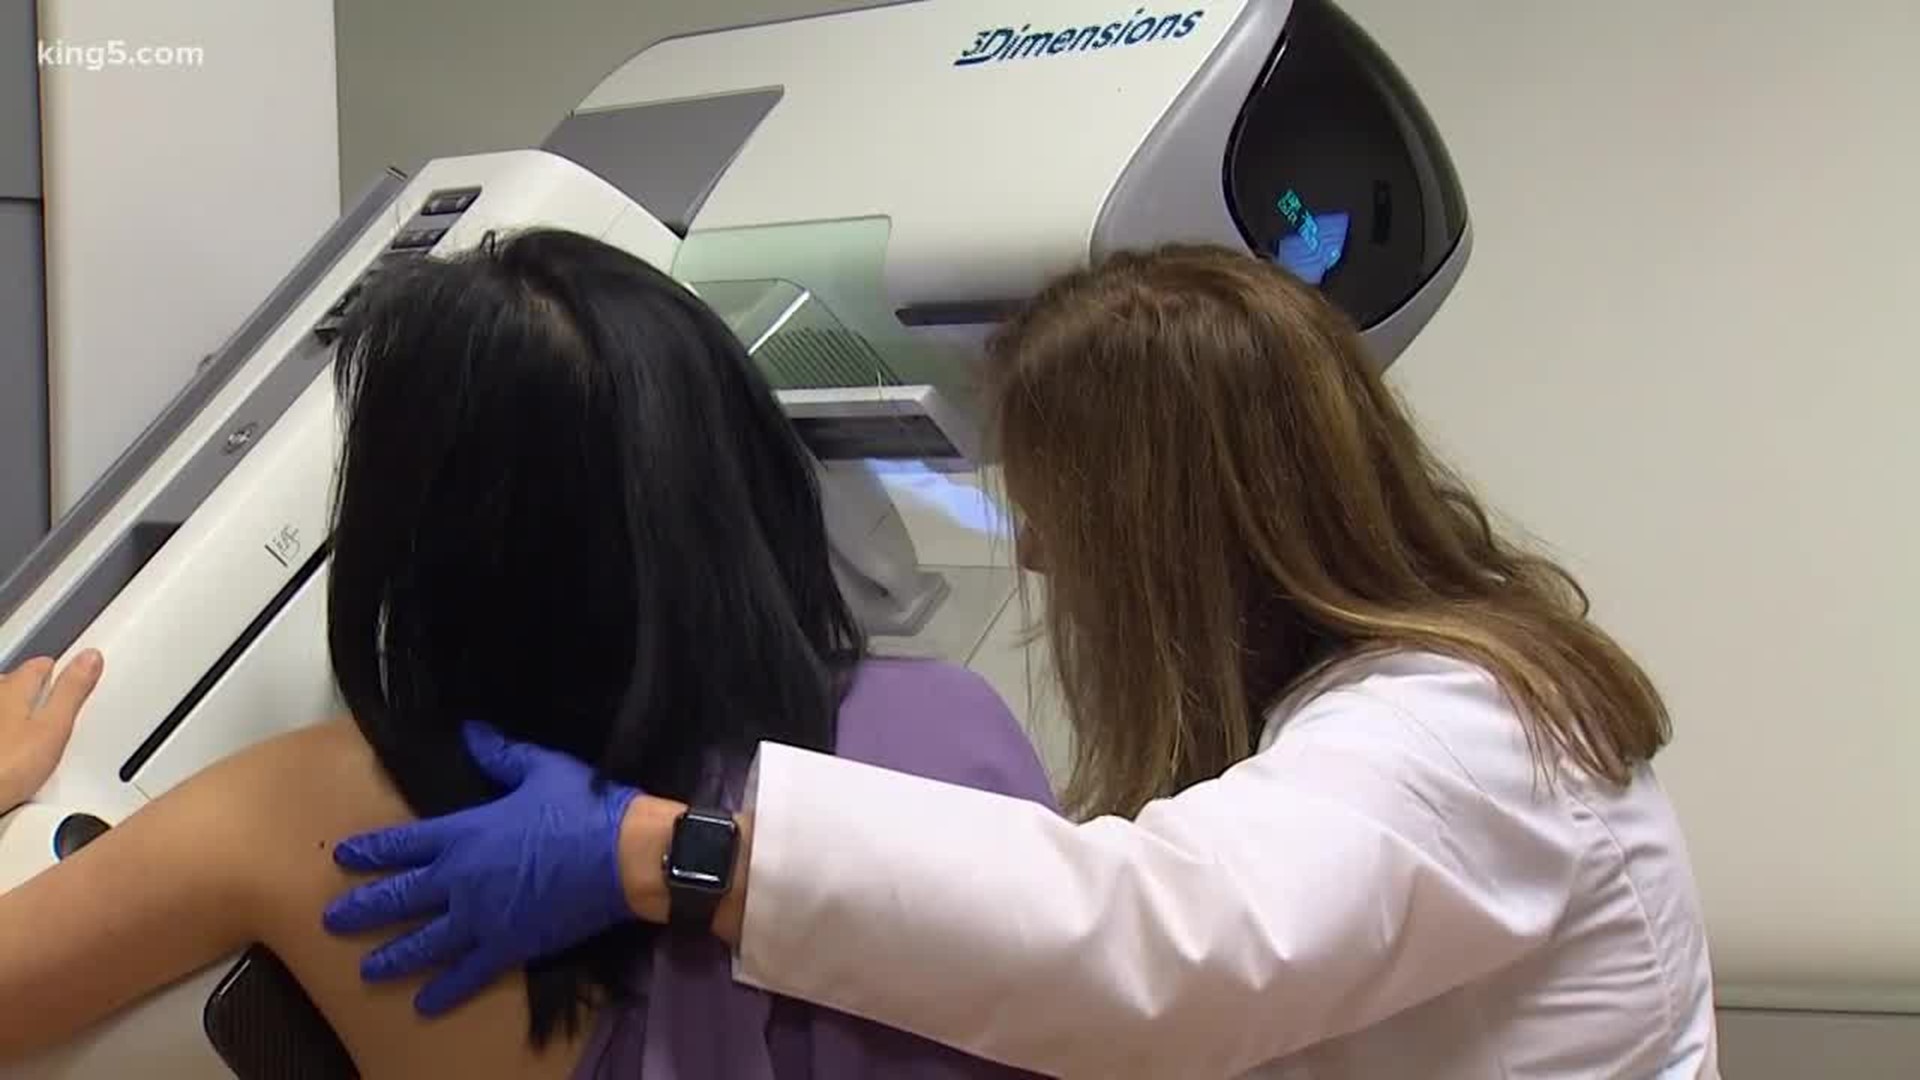 Turns out, studies show women still don't like getting screened because they're afraid of pain. Another barrier impacts foreign-born women living in the U.S.